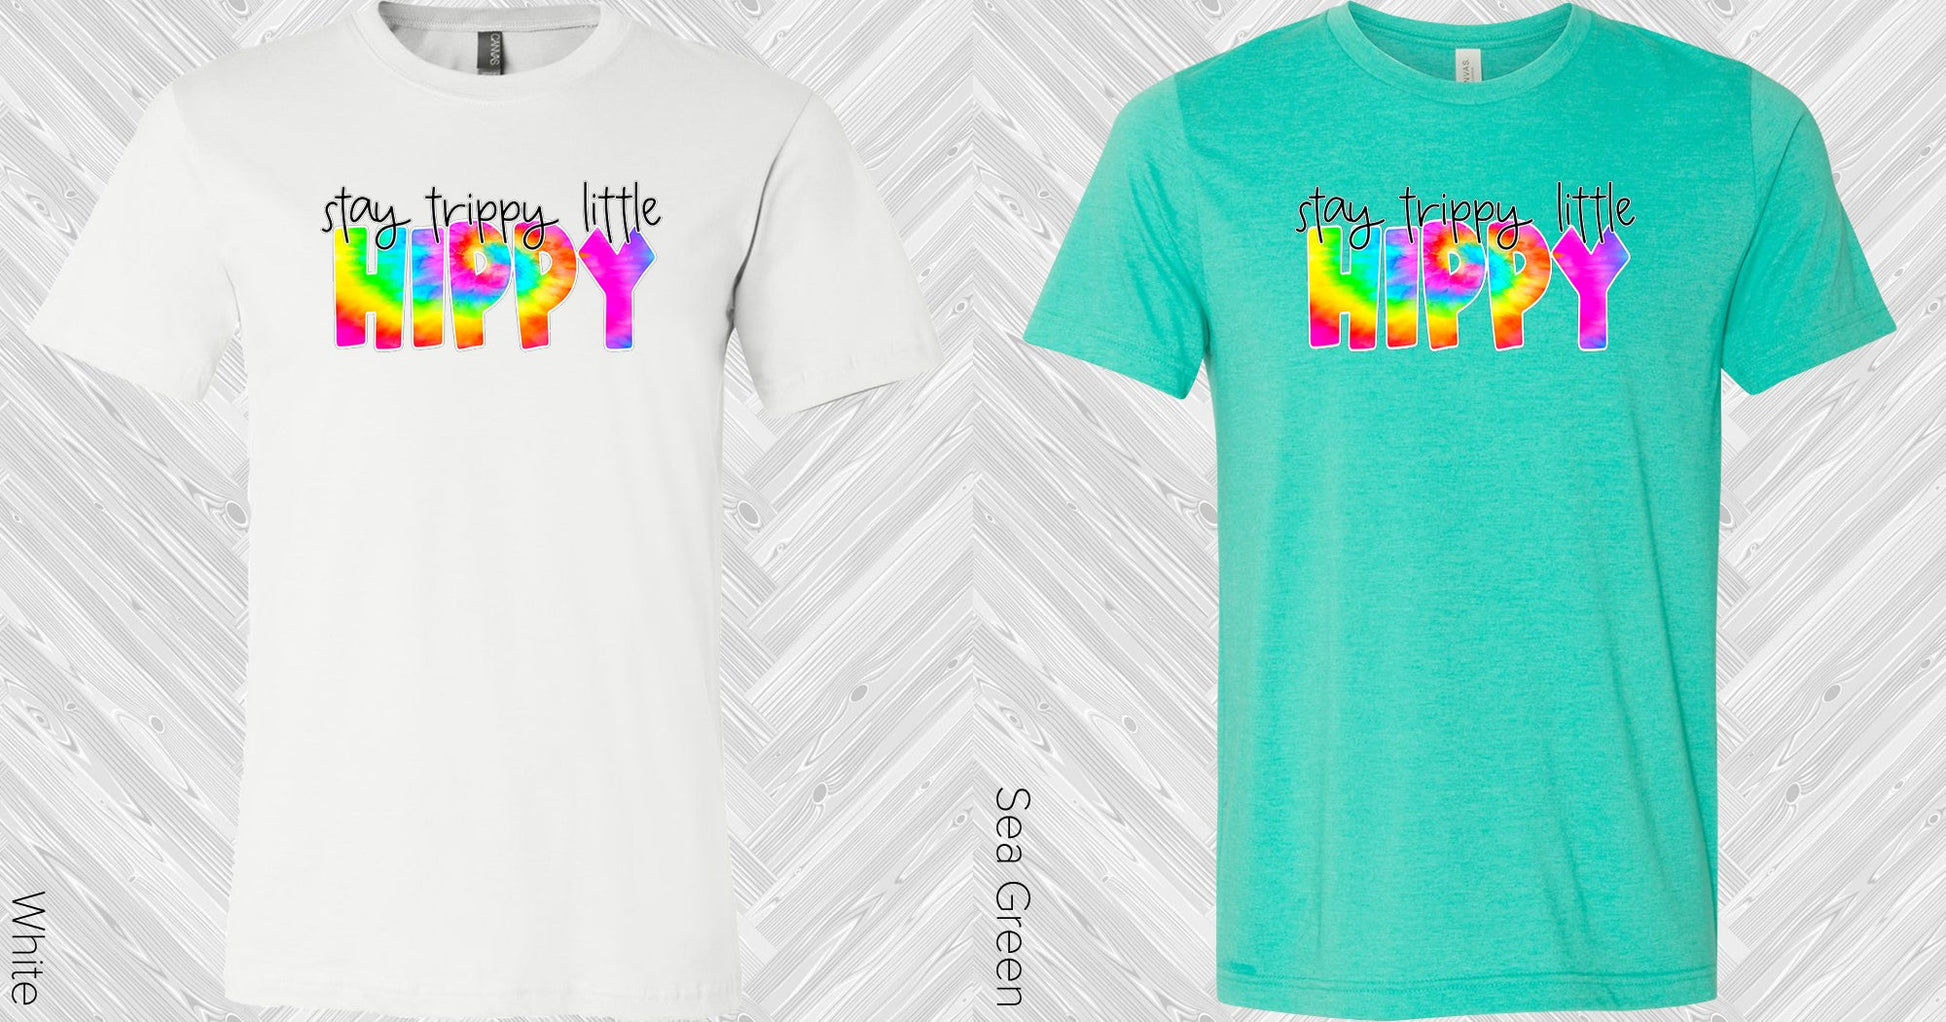 Stay Trippy Little Hippy Graphic Tee Graphic Tee